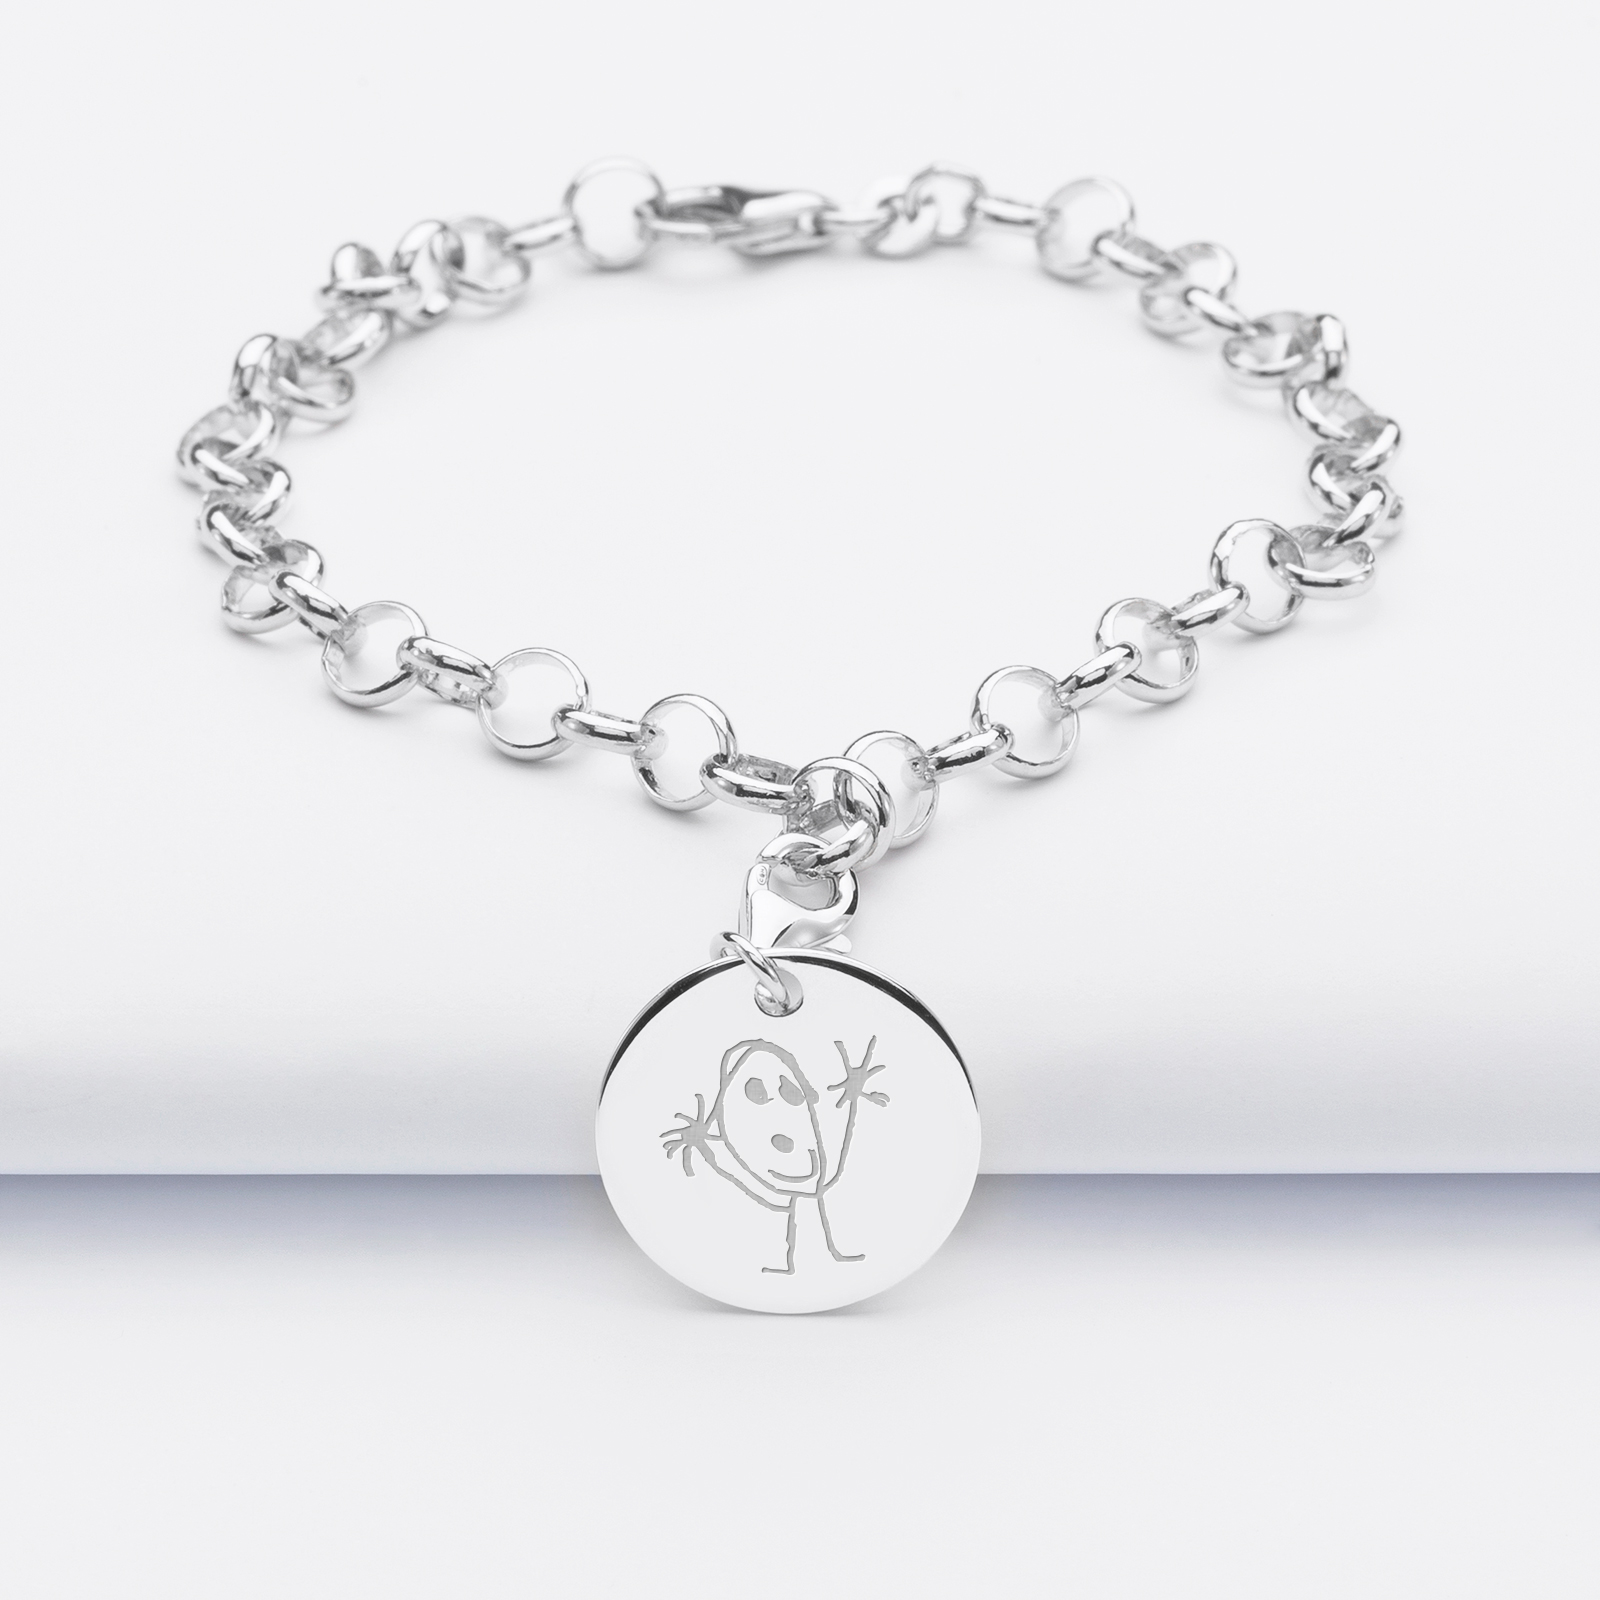 Personalised silver 17mm engraved bracelet with 1 charm - sketch